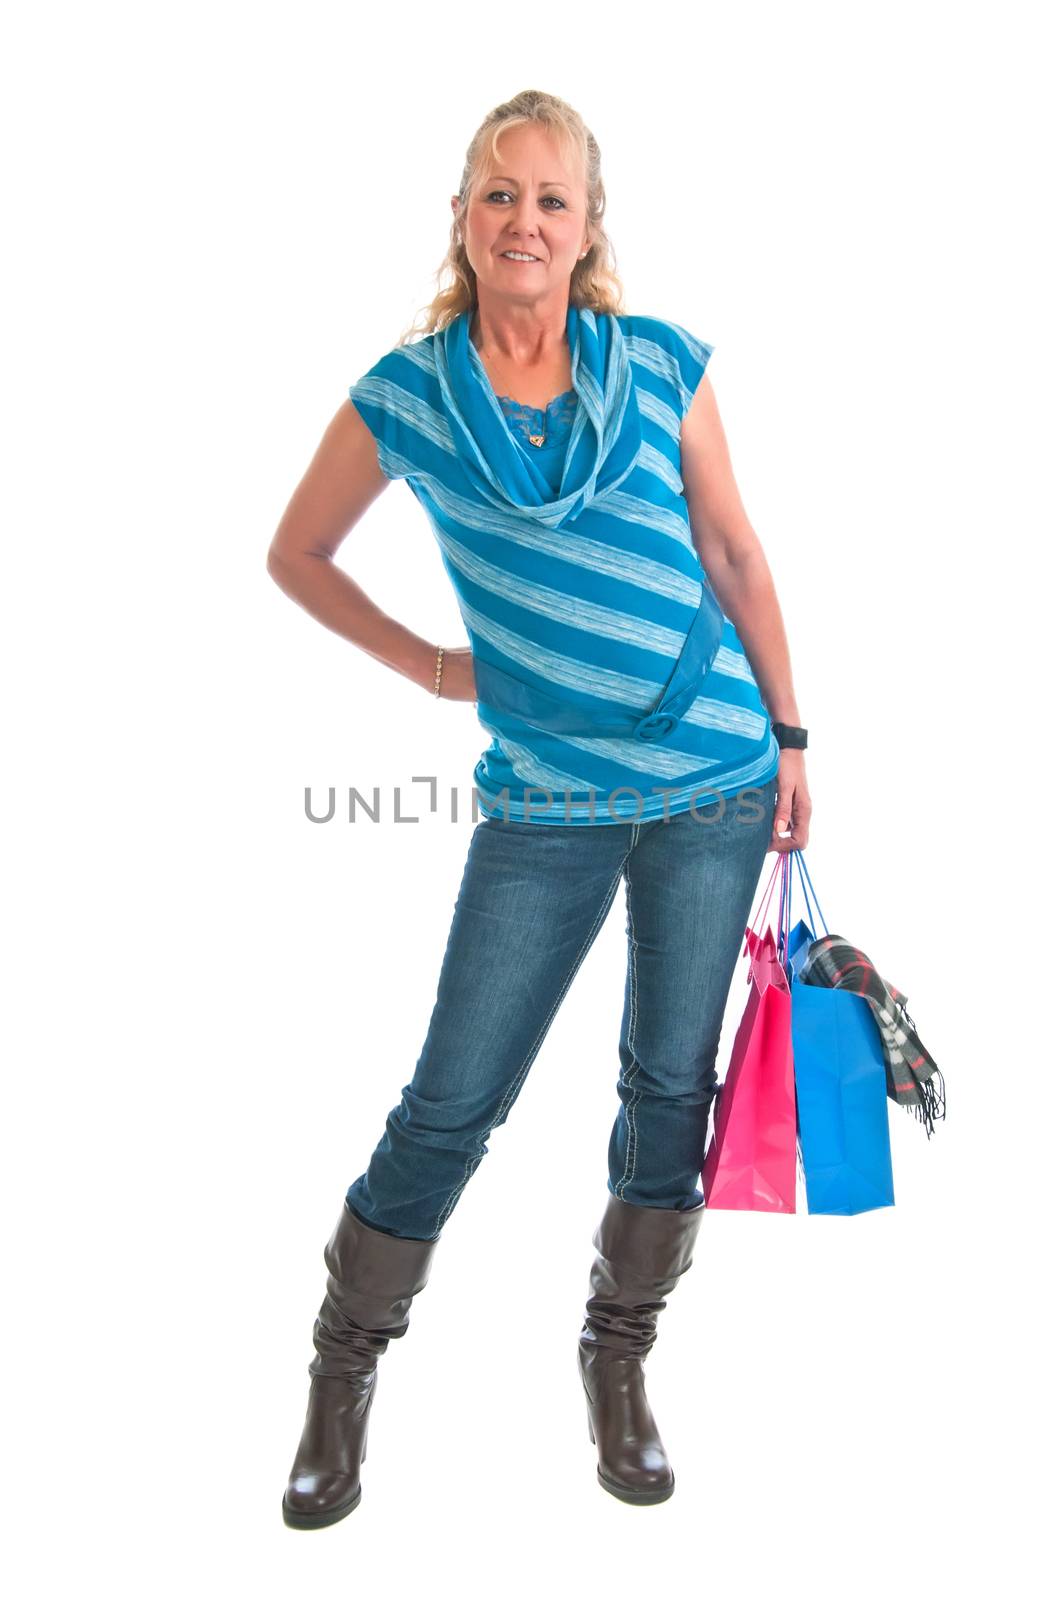 Pretty blonde woman with a couple of bags of gifts she recently bought for freinds. Isolated on a white background.